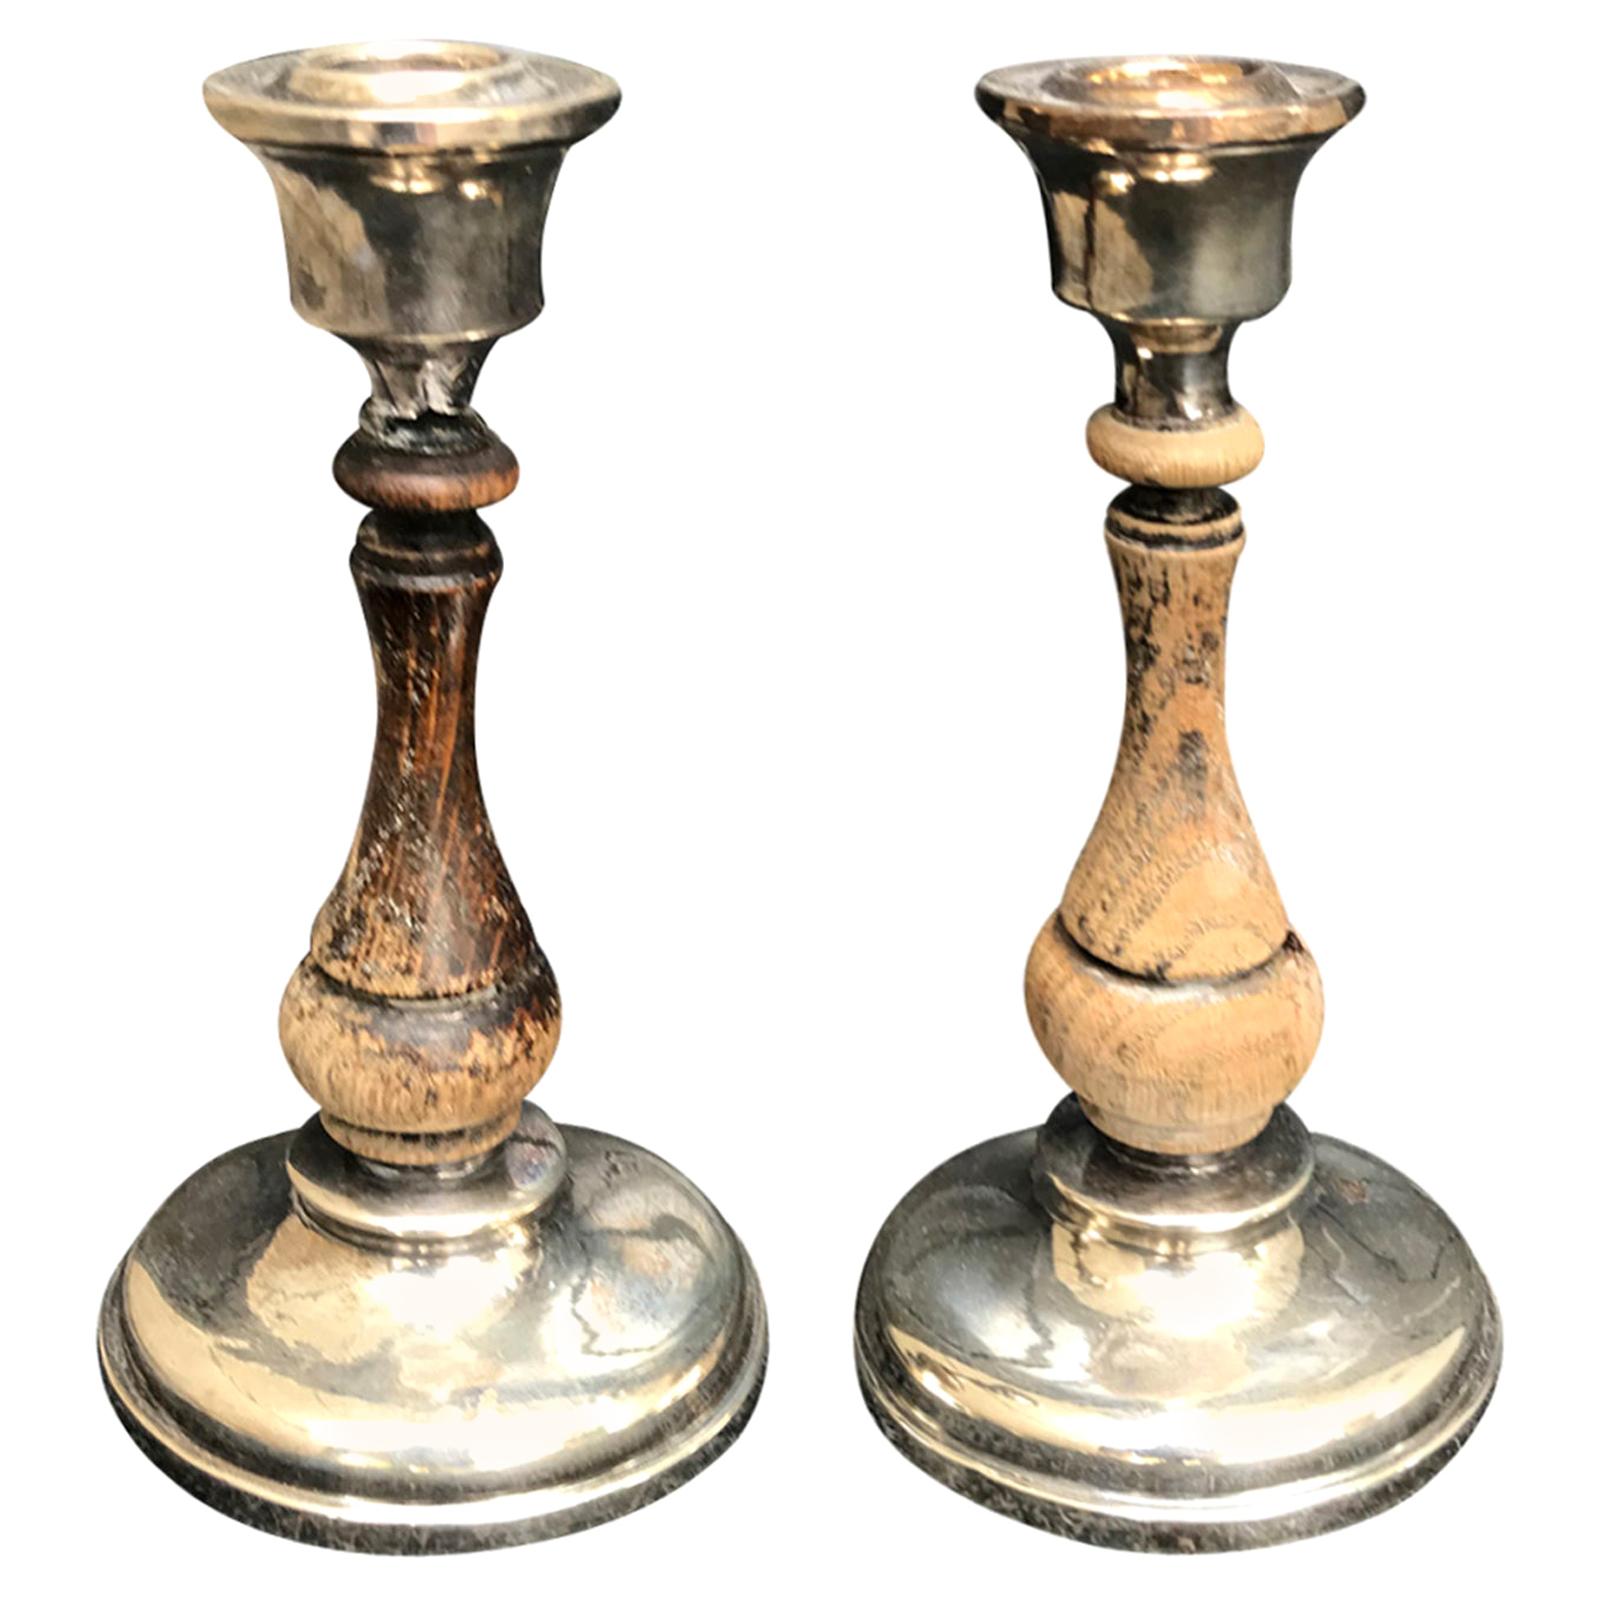 Pair of 19th-20th Century Sterling Silver and Wood Candlesticks, Hallmarked